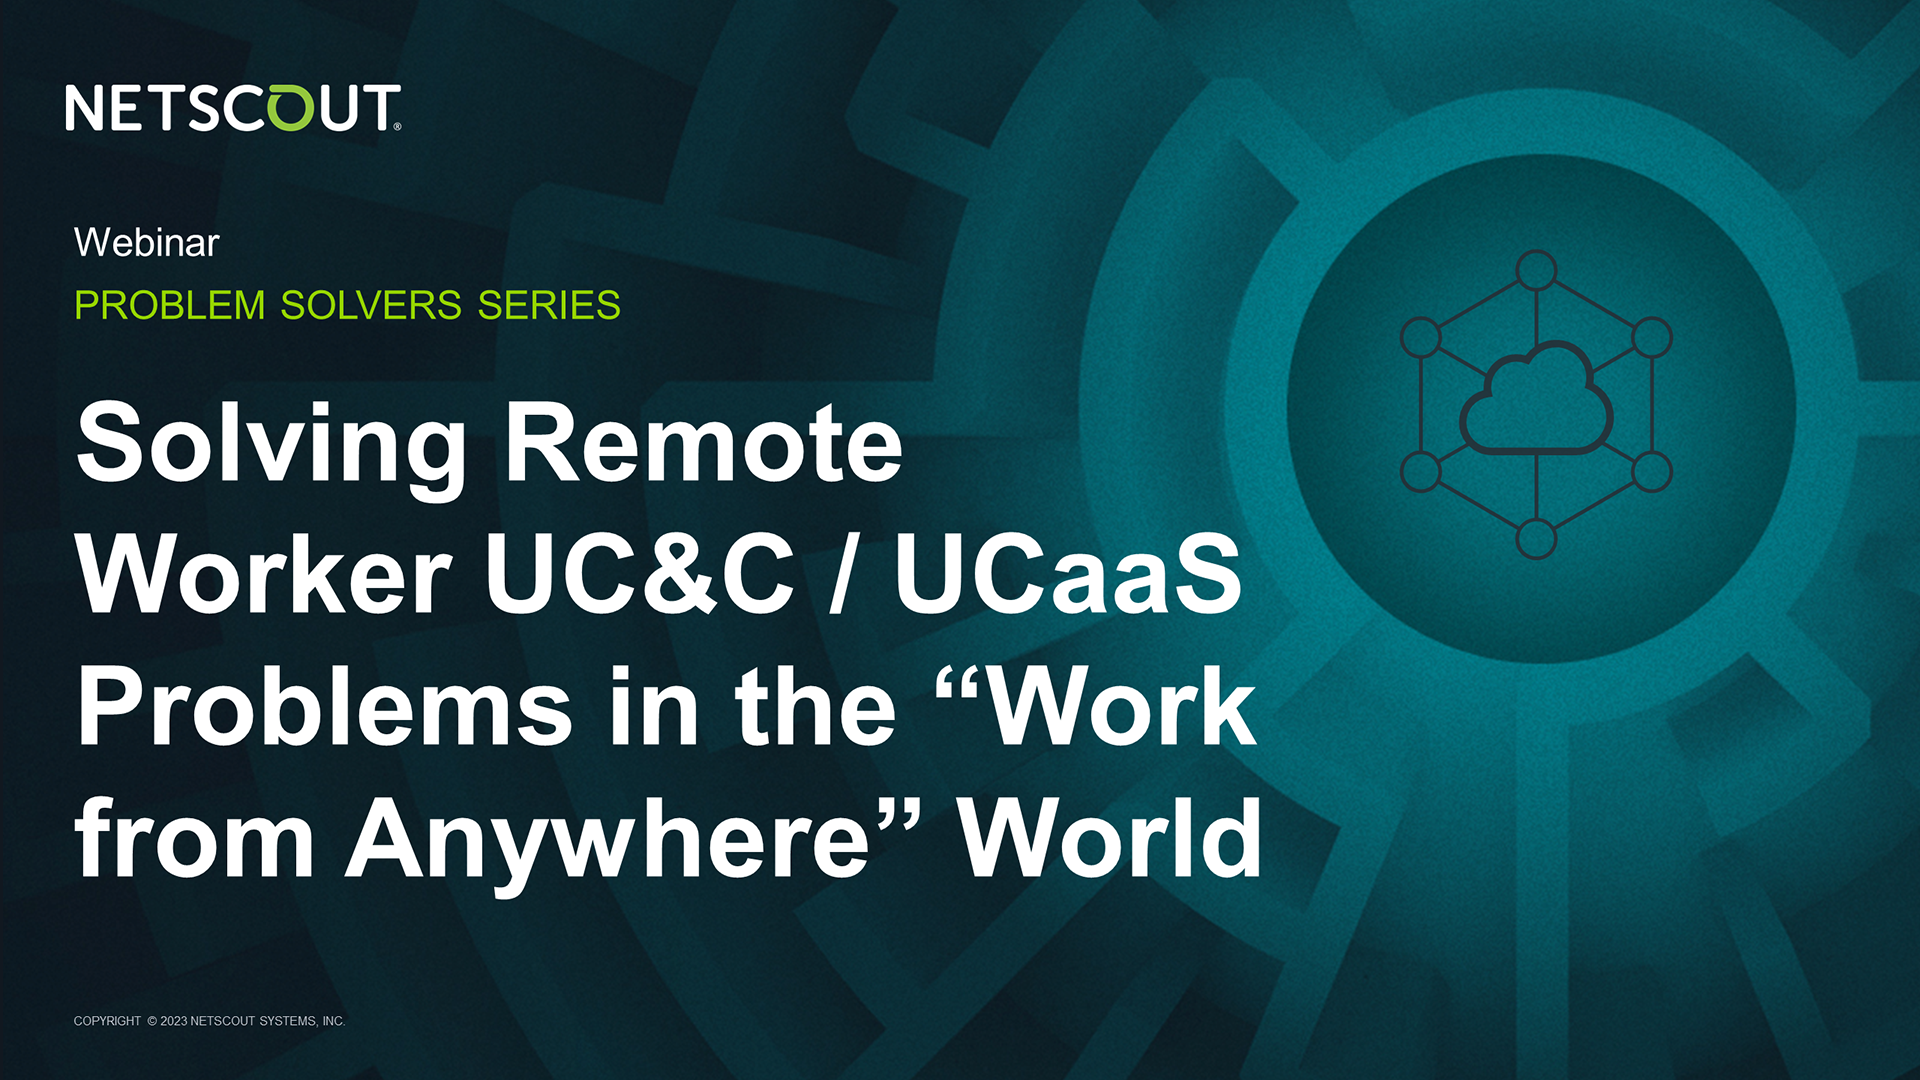 Solving Remote Worker UC&C/UCaaS Problems in the “Work from Anywhere” World